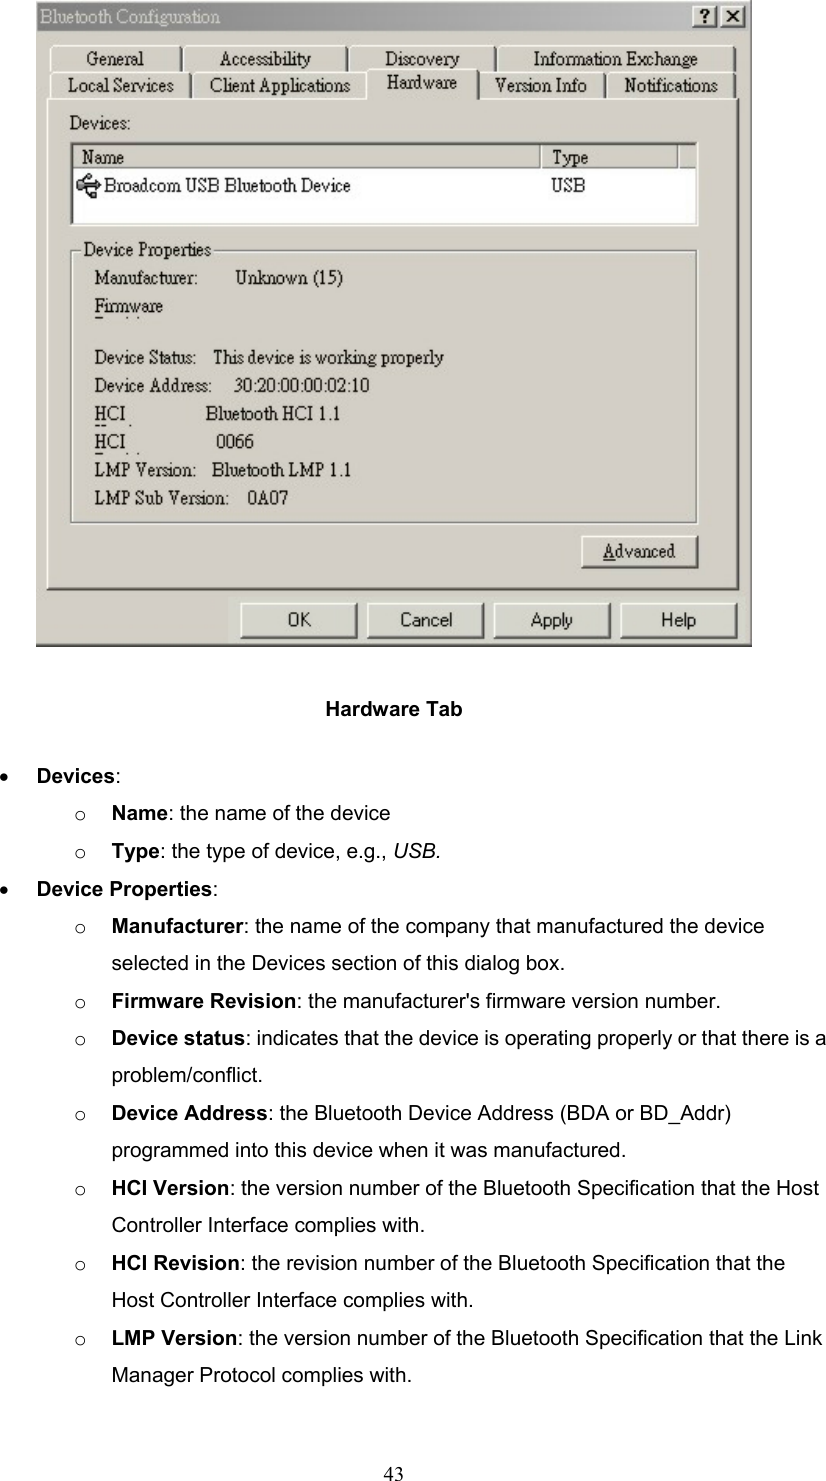  43  Hardware Tab •  Devices: o  Name: the name of the device o  Type: the type of device, e.g., USB. •  Device Properties: o  Manufacturer: the name of the company that manufactured the device selected in the Devices section of this dialog box. o  Firmware Revision: the manufacturer&apos;s firmware version number. o  Device status: indicates that the device is operating properly or that there is a problem/conflict. o  Device Address: the Bluetooth Device Address (BDA or BD_Addr) programmed into this device when it was manufactured. o  HCI Version: the version number of the Bluetooth Specification that the Host Controller Interface complies with. o  HCI Revision: the revision number of the Bluetooth Specification that the Host Controller Interface complies with. o  LMP Version: the version number of the Bluetooth Specification that the Link Manager Protocol complies with. 